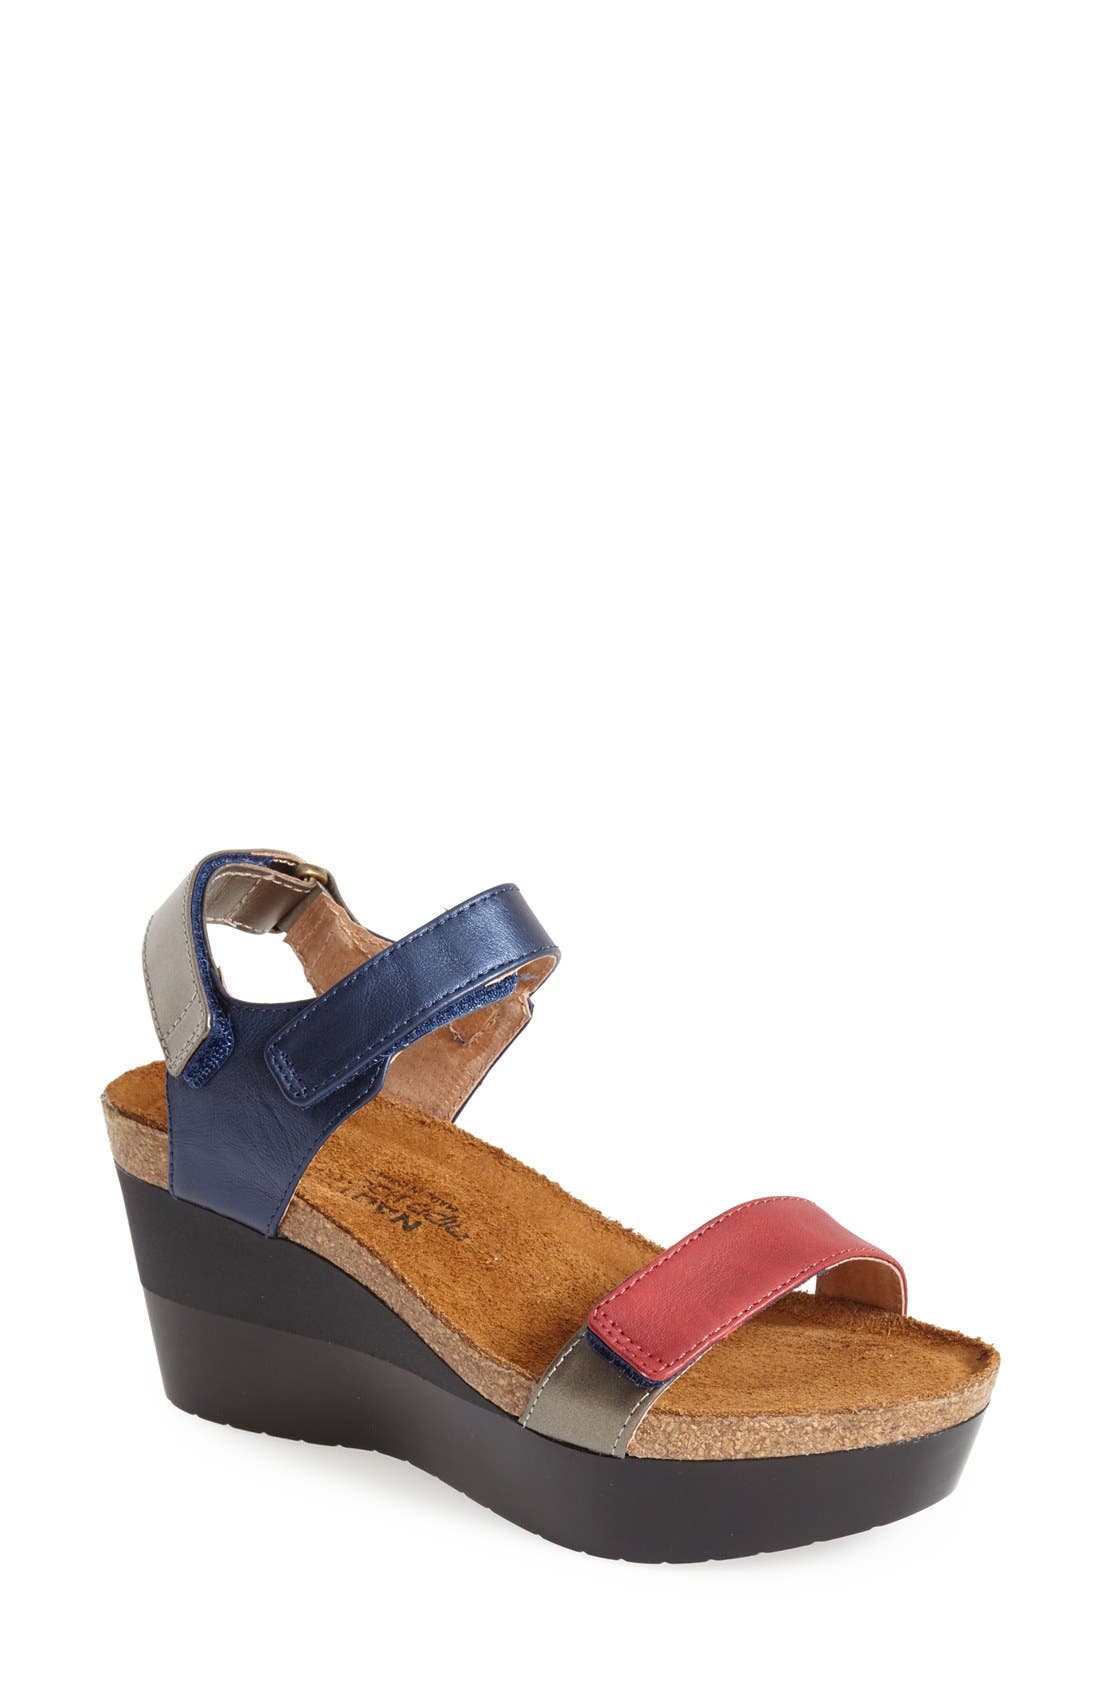 Naot 'Miracle' Sandal | Nordstrom